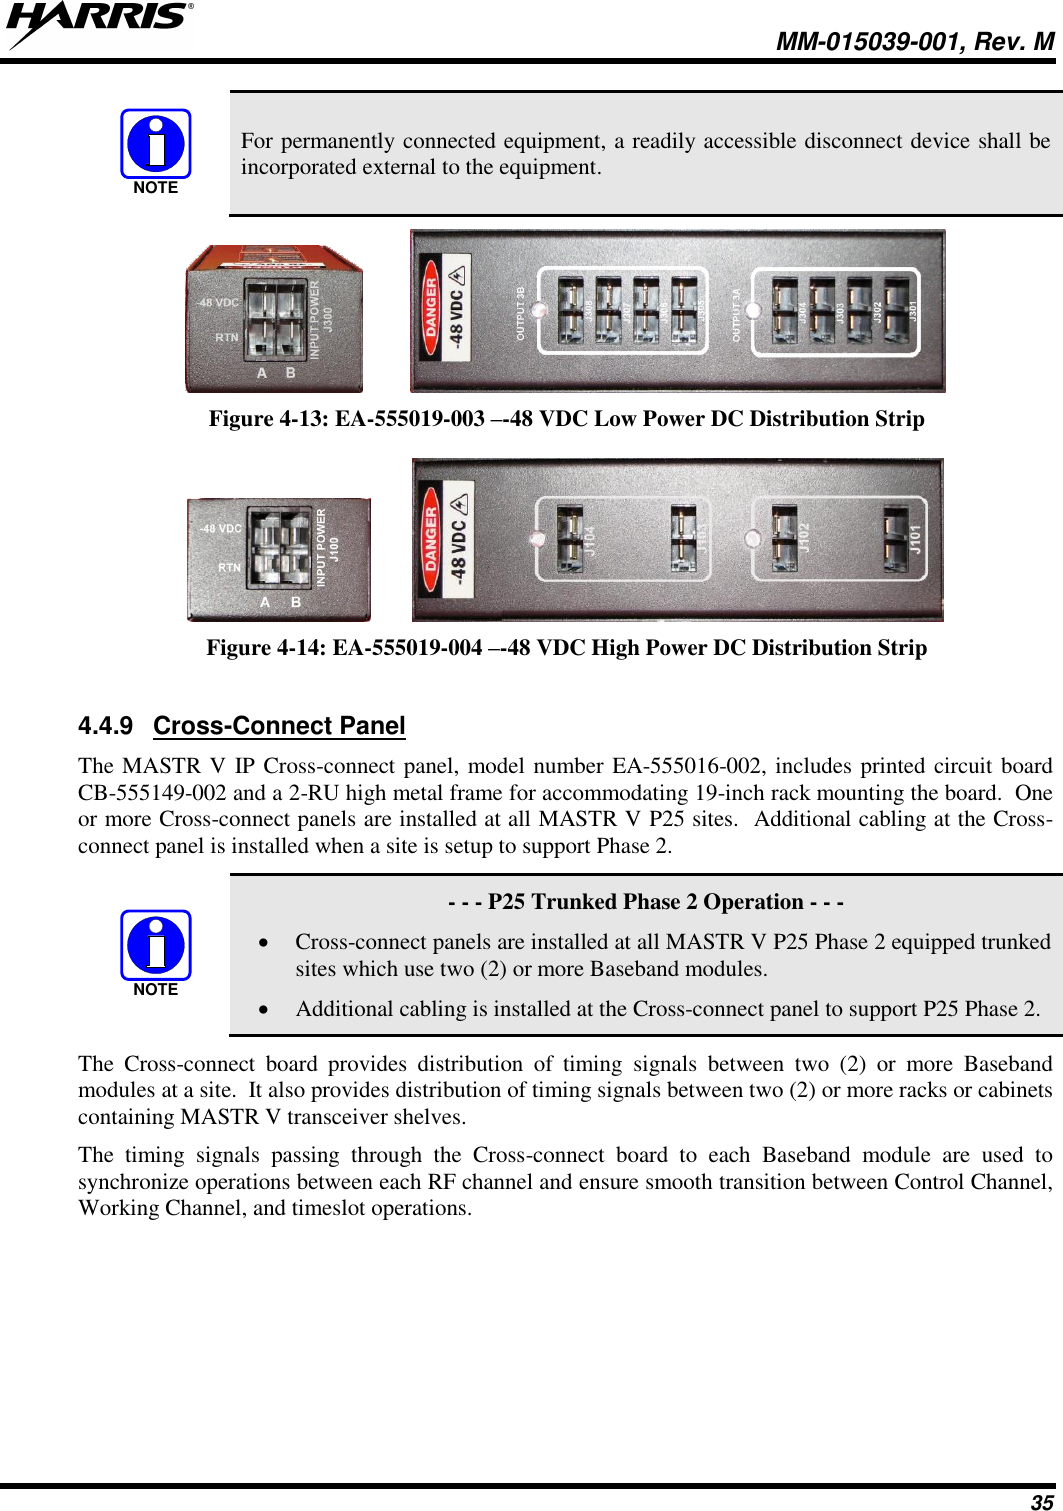   MM-015039-001, Rev. M 35  For permanently connected equipment, a readily accessible disconnect device shall be incorporated external to the equipment.    Figure 4-13: EA-555019-003 –-48 VDC Low Power DC Distribution Strip     Figure 4-14: EA-555019-004 –-48 VDC High Power DC Distribution Strip  4.4.9  Cross-Connect Panel The MASTR V IP Cross-connect panel, model number EA-555016-002, includes printed circuit board CB-555149-002 and a 2-RU high metal frame for accommodating 19-inch rack mounting the board.  One or more Cross-connect panels are installed at all MASTR V P25 sites.  Additional cabling at the Cross-connect panel is installed when a site is setup to support Phase 2.     - - - P25 Trunked Phase 2 Operation - - - • Cross-connect panels are installed at all MASTR V P25 Phase 2 equipped trunked sites which use two (2) or more Baseband modules. • Additional cabling is installed at the Cross-connect panel to support P25 Phase 2. The  Cross-connect  board  provides  distribution  of  timing  signals  between  two  (2)  or  more  Baseband modules at a site.  It also provides distribution of timing signals between two (2) or more racks or cabinets containing MASTR V transceiver shelves.   The  timing  signals  passing  through  the  Cross-connect  board  to  each  Baseband  module  are  used  to synchronize operations between each RF channel and ensure smooth transition between Control Channel, Working Channel, and timeslot operations.  NOTENOTE